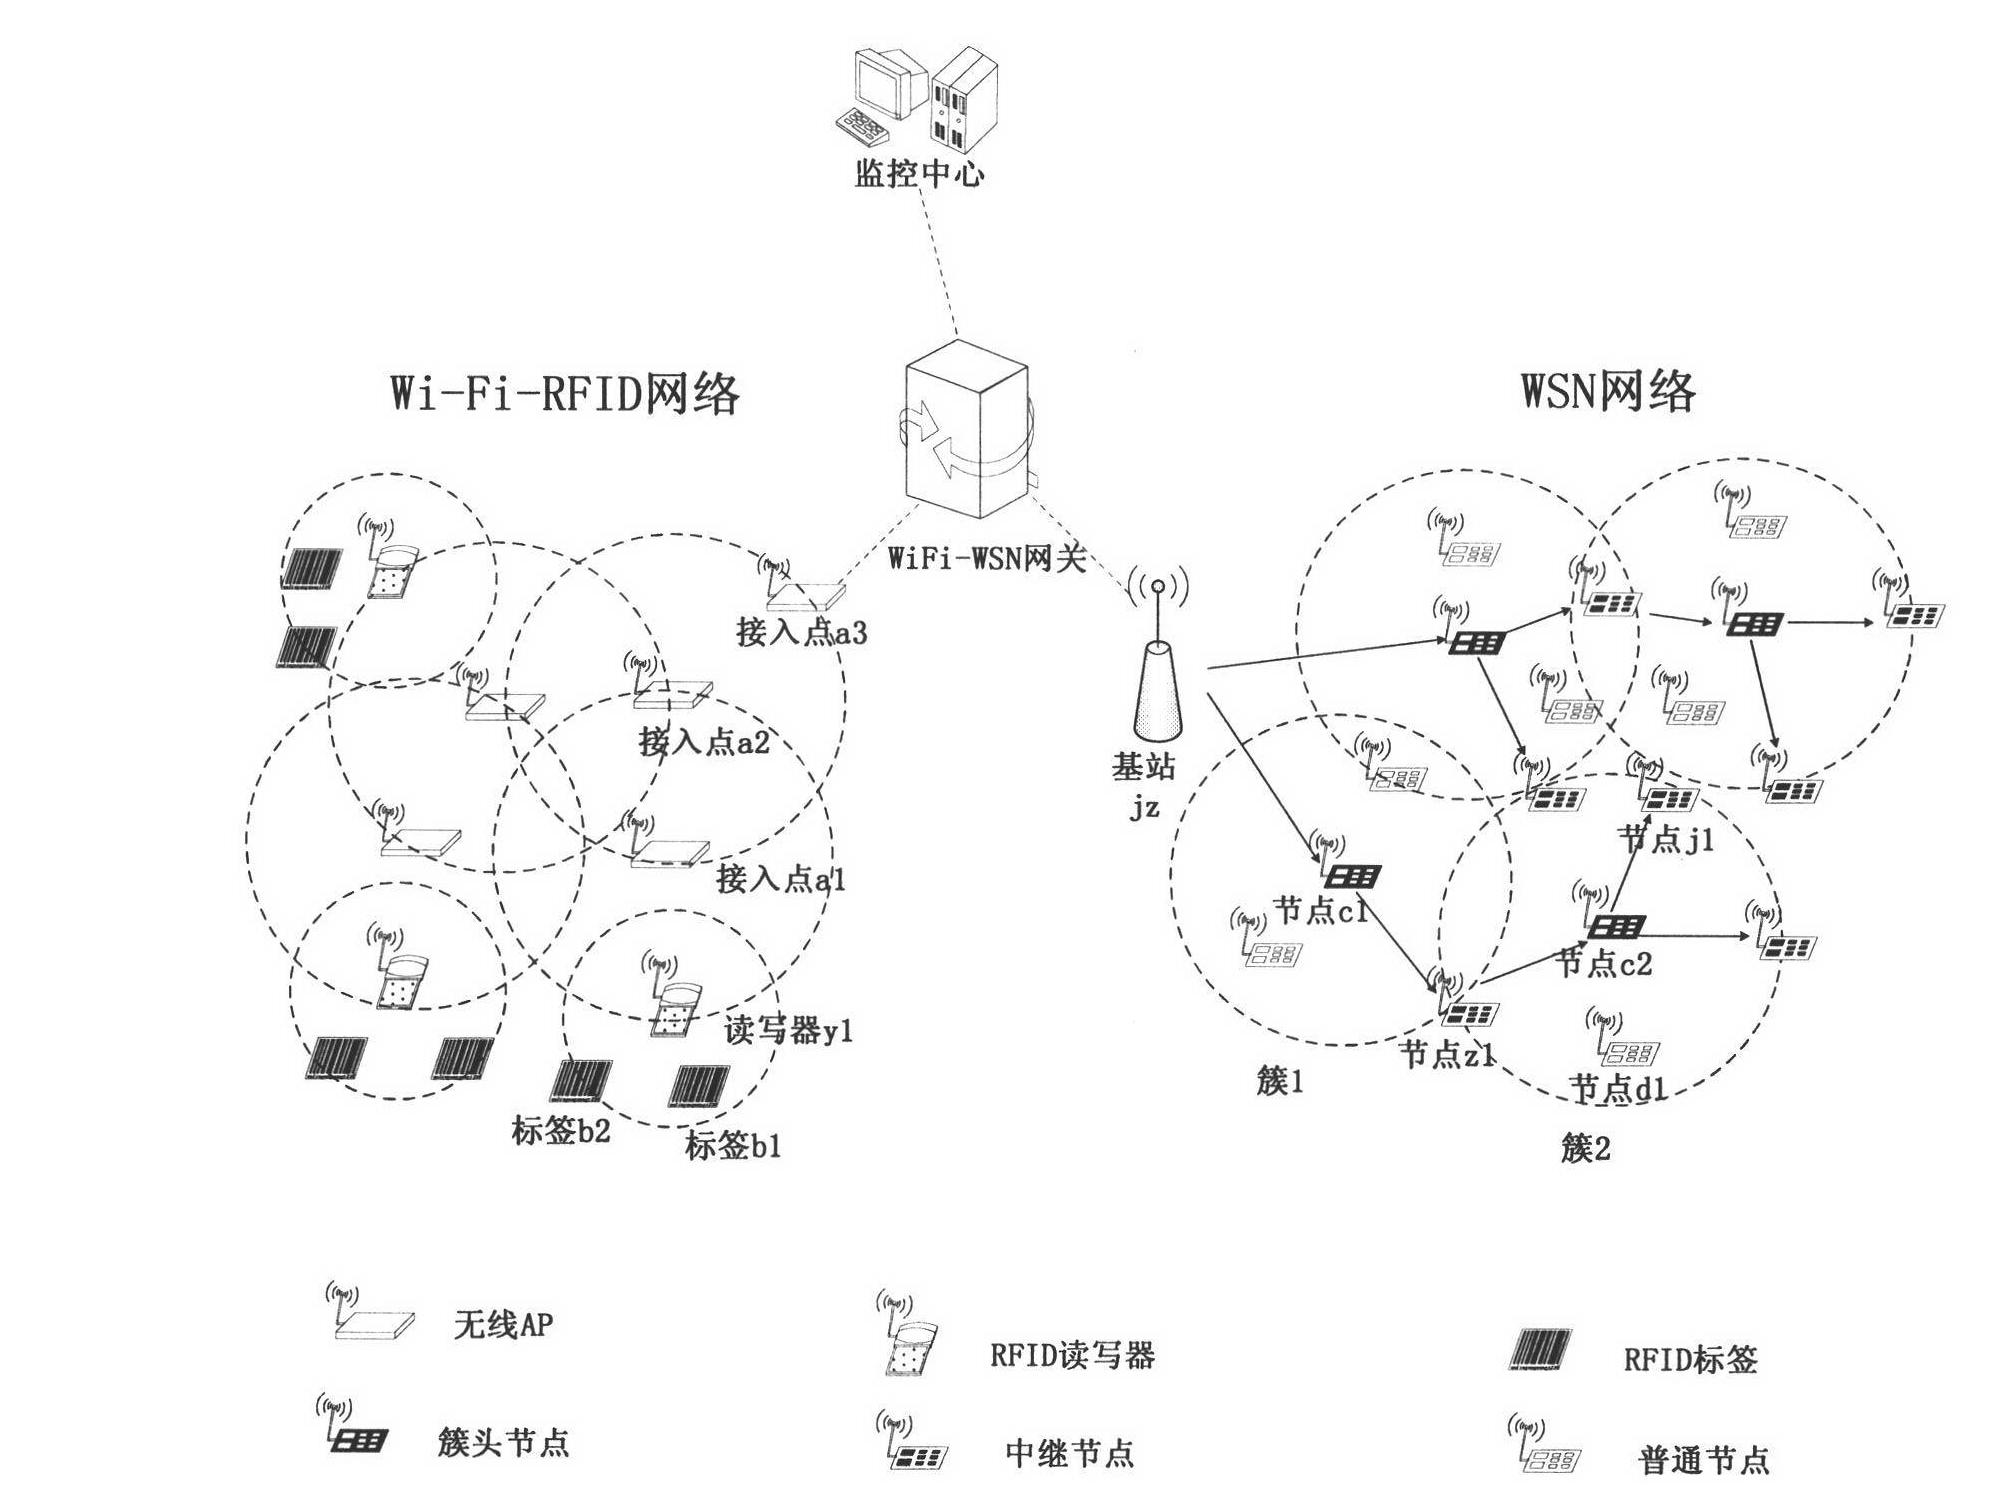 Container logistic tracking and positioning method based on tag sensor network